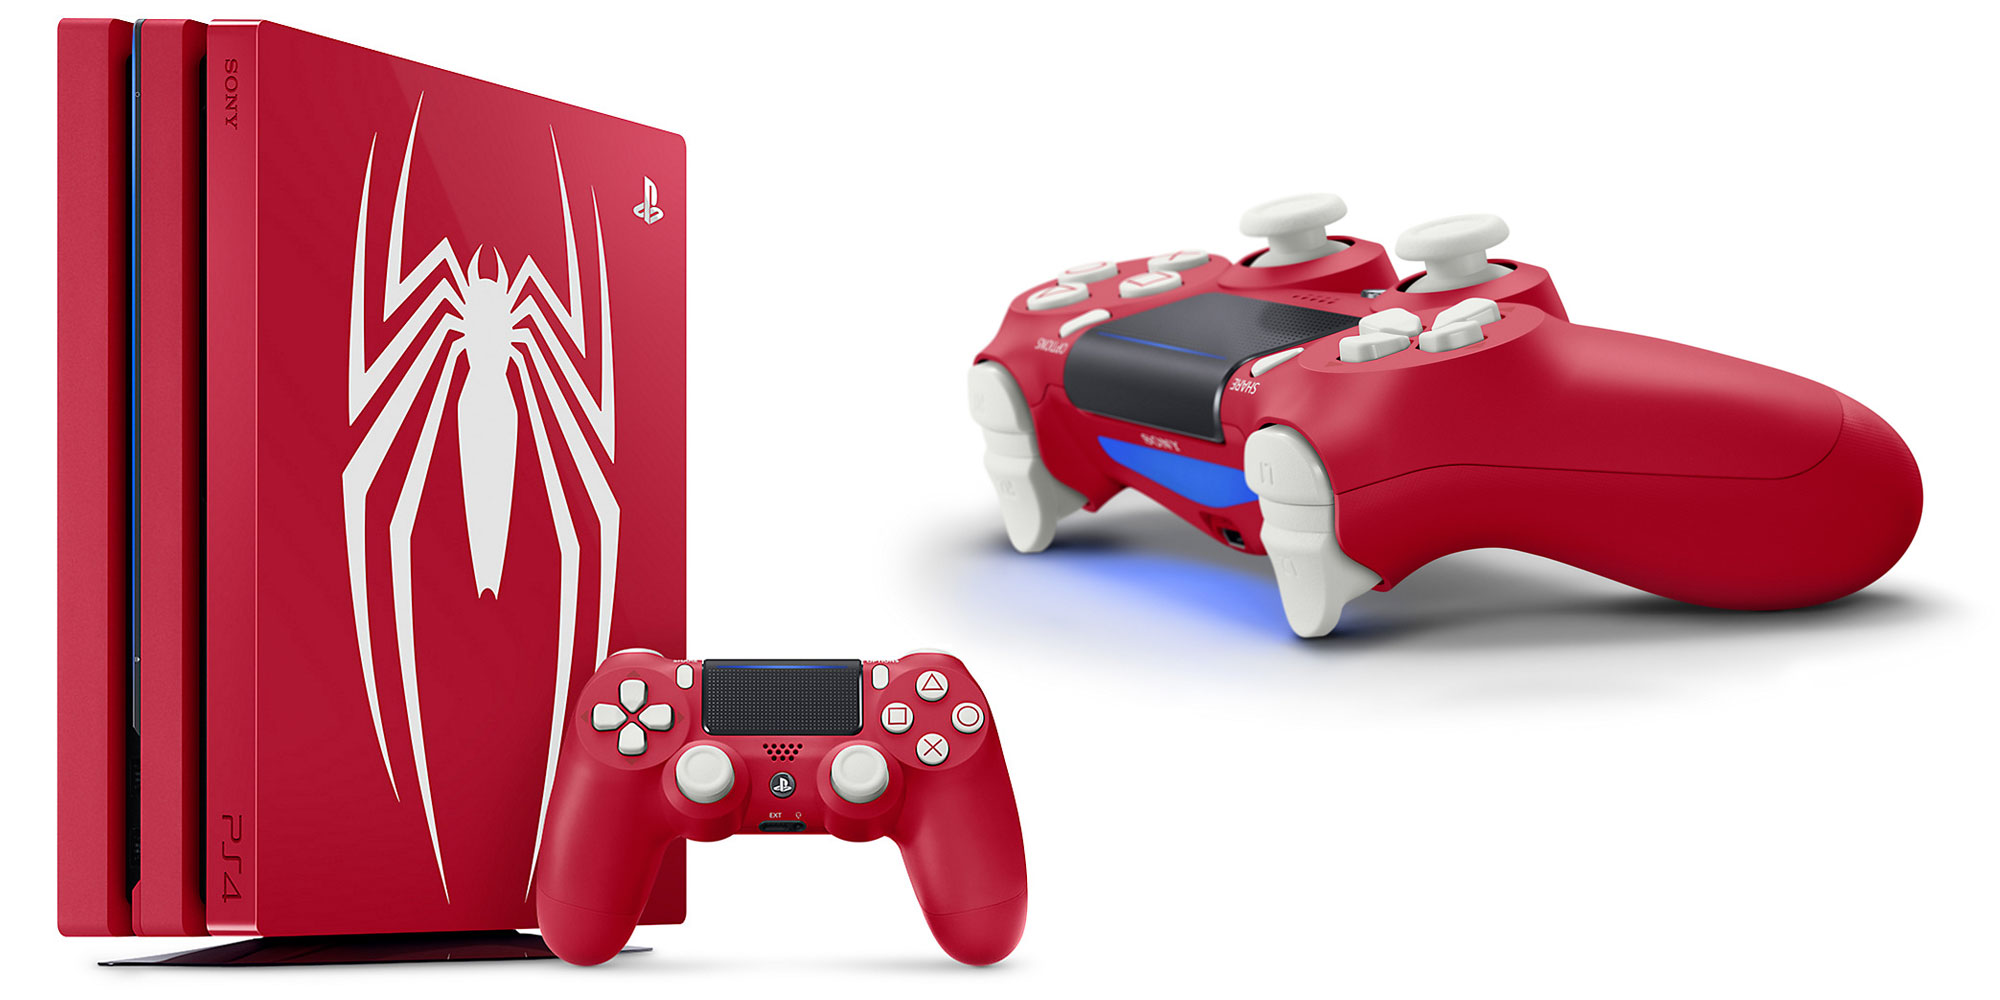 Sony announces a special edition SpiderMan PlayStation 4 Pro